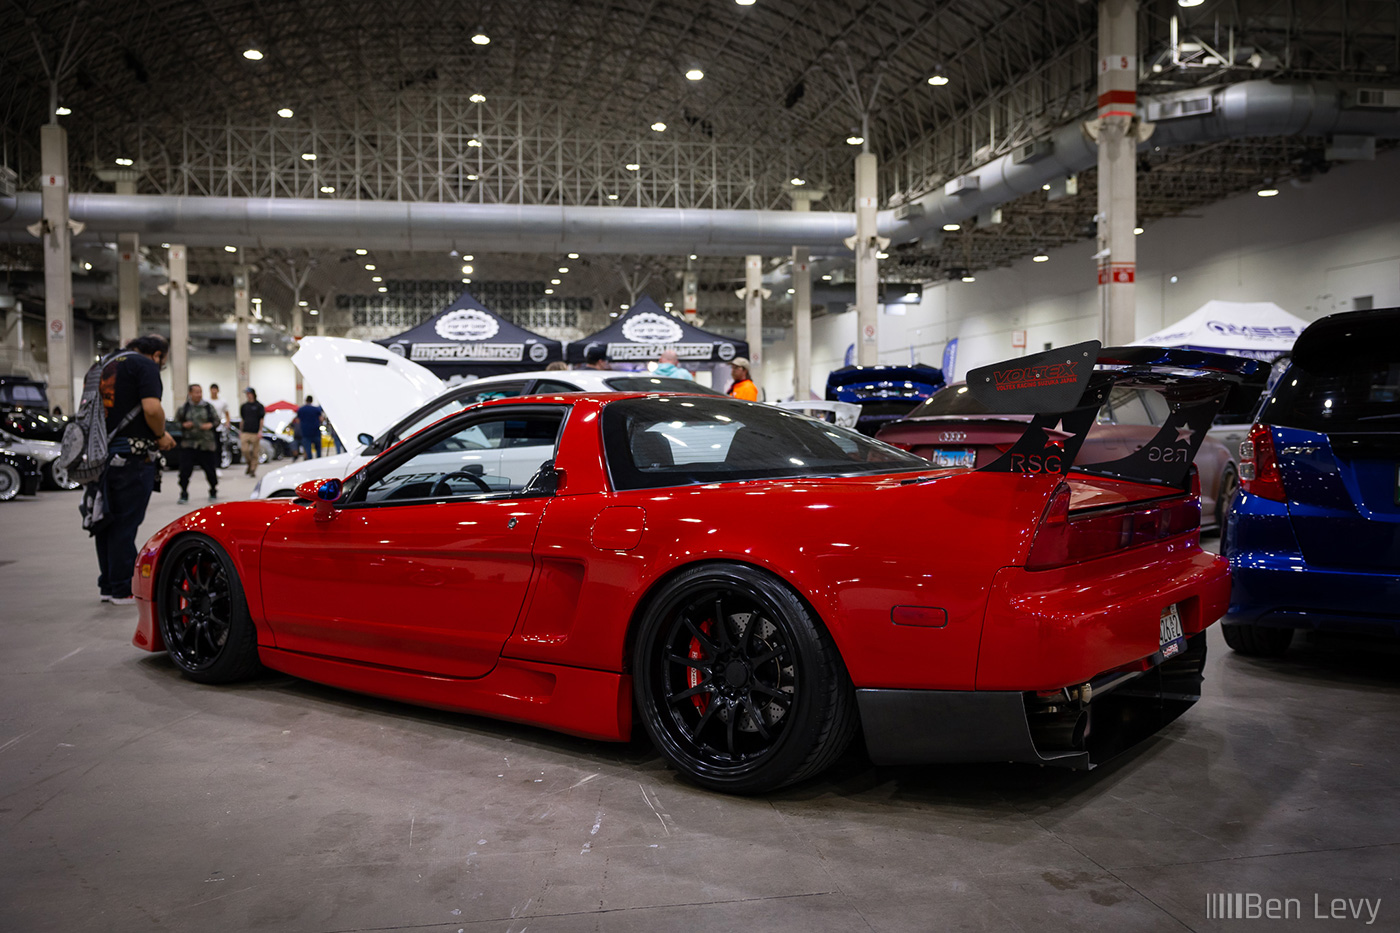 Red Acura NSX with Voltex Wing